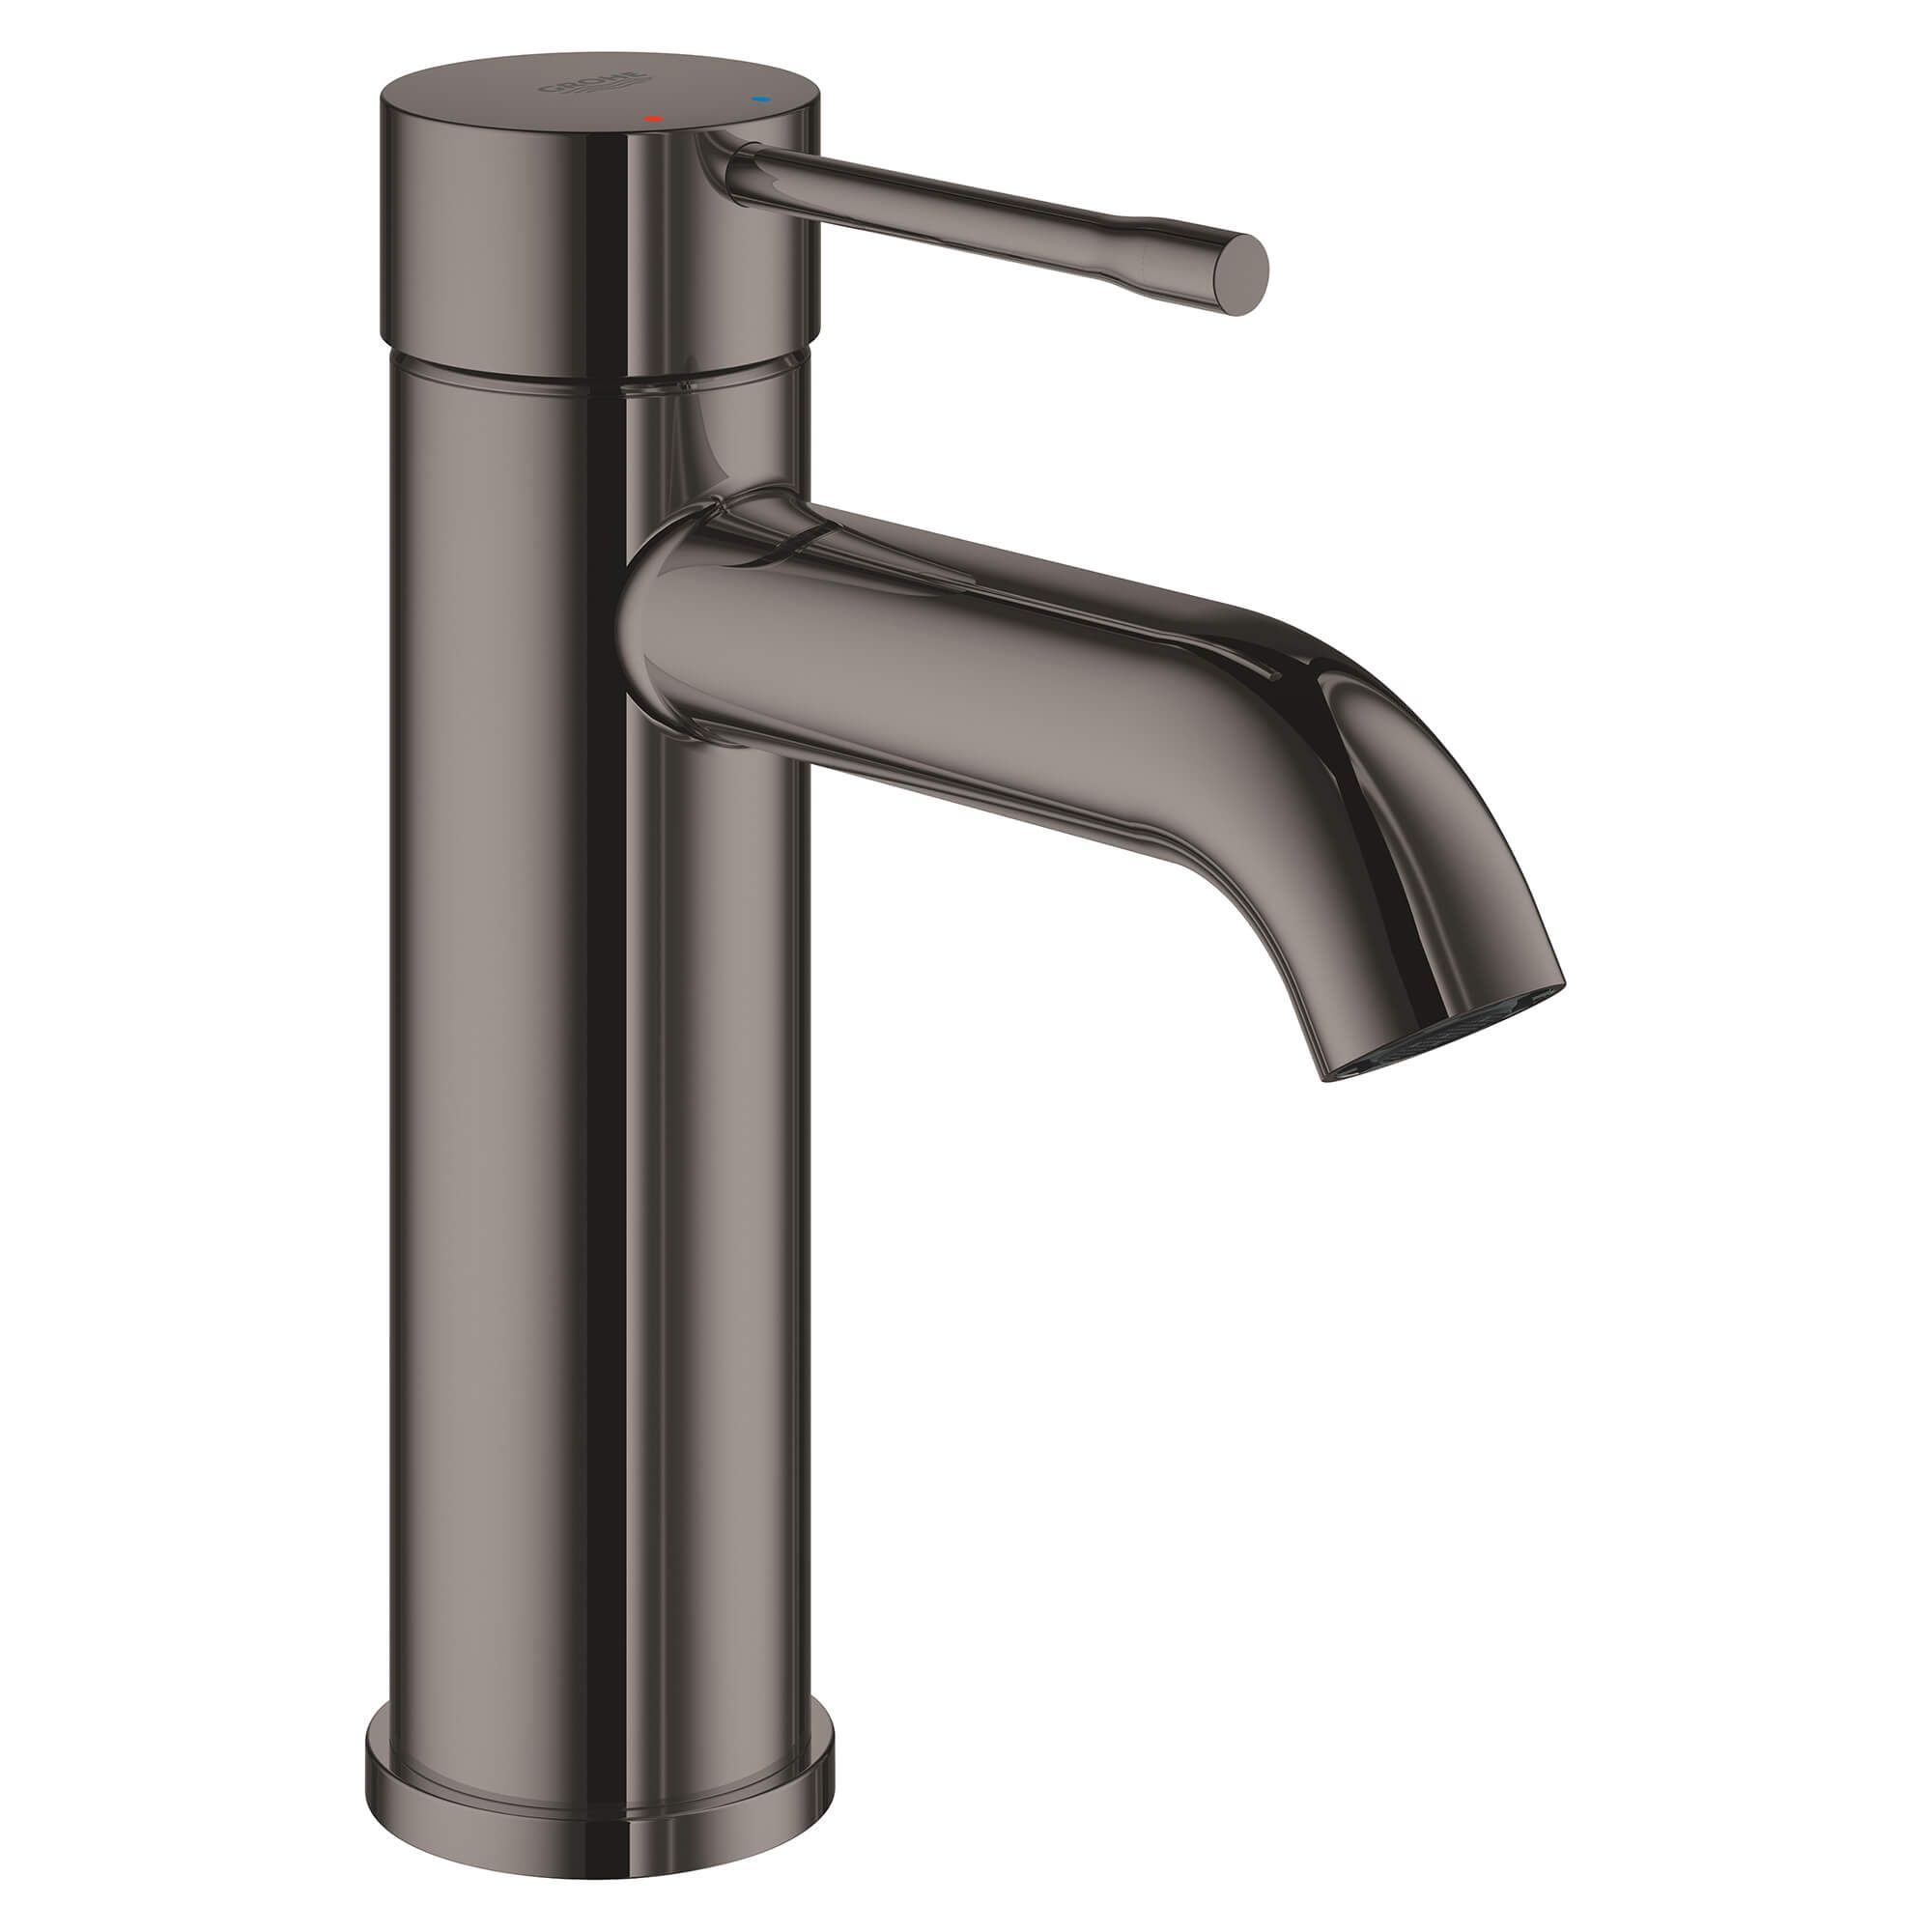 GROHE Essence New Hard Graphite 1-handle Single WaterSense Bathroom Faucet with Drain in the Bathroom Sink department at Lowes.com